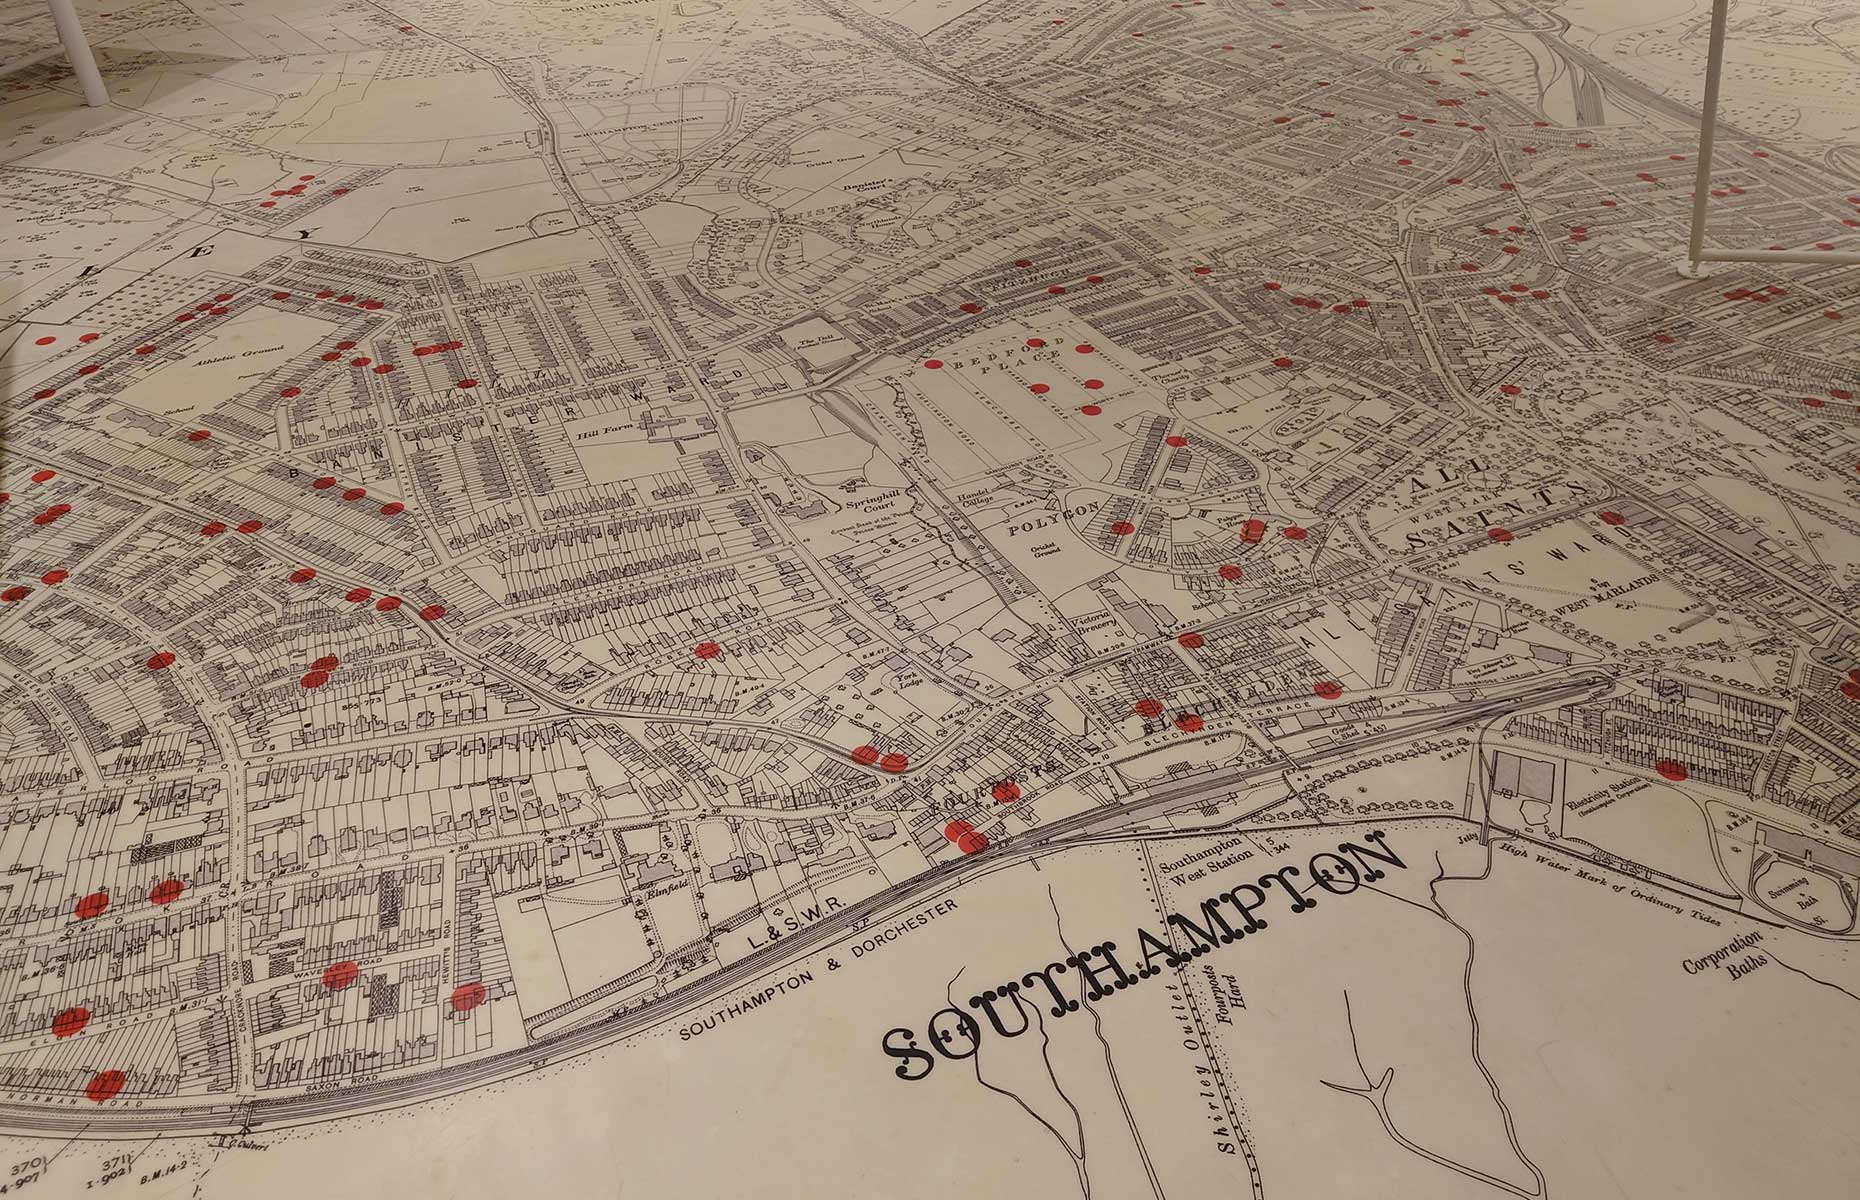 Map of Southampton showing losses from the Titanic at SeaCity Museum (Image: Courtesy of SeaCity Museum)